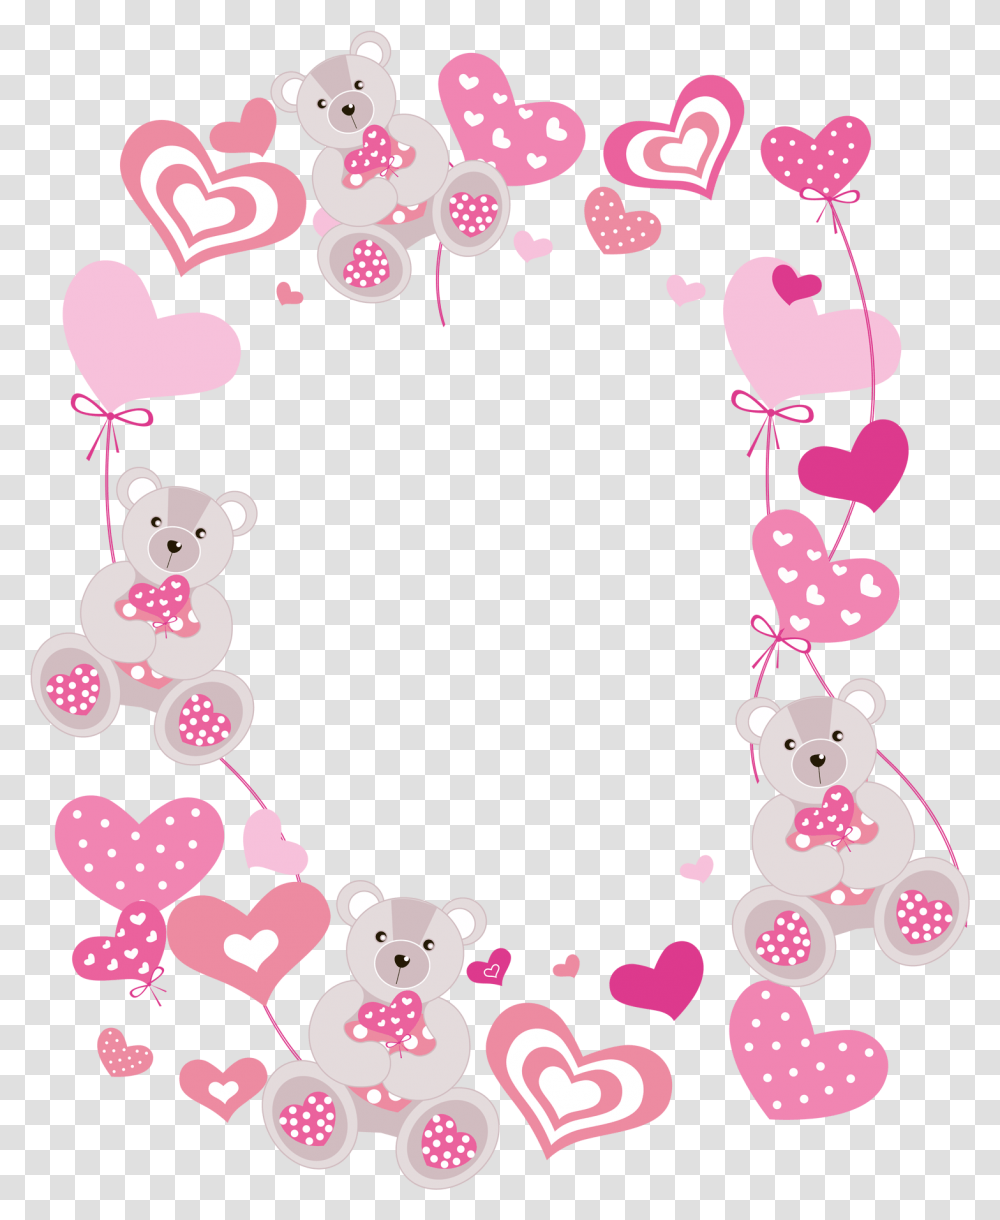 Pin By Cheryl Mayo On Cards Valentine's Cute Frame Clipart, Plant, Wreath, Heart Transparent Png